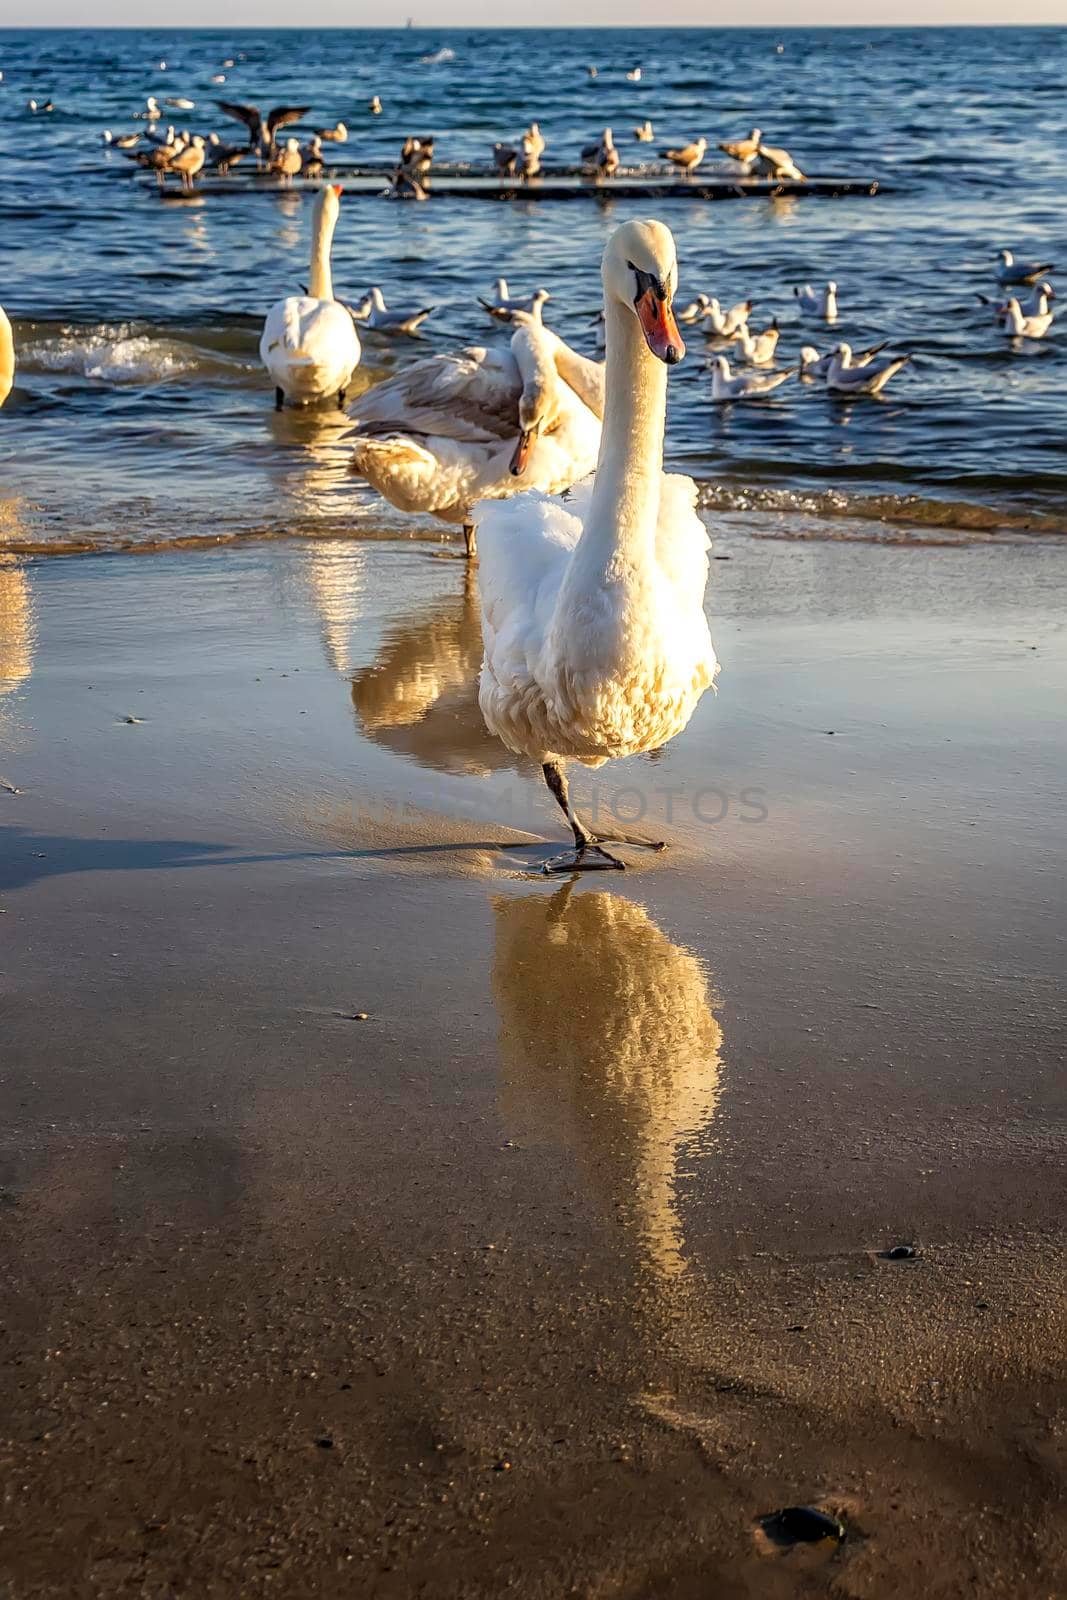 A beautiful white swan on the beach with reflection. Birds at the seaside near Varna, Bulgaria by EdVal